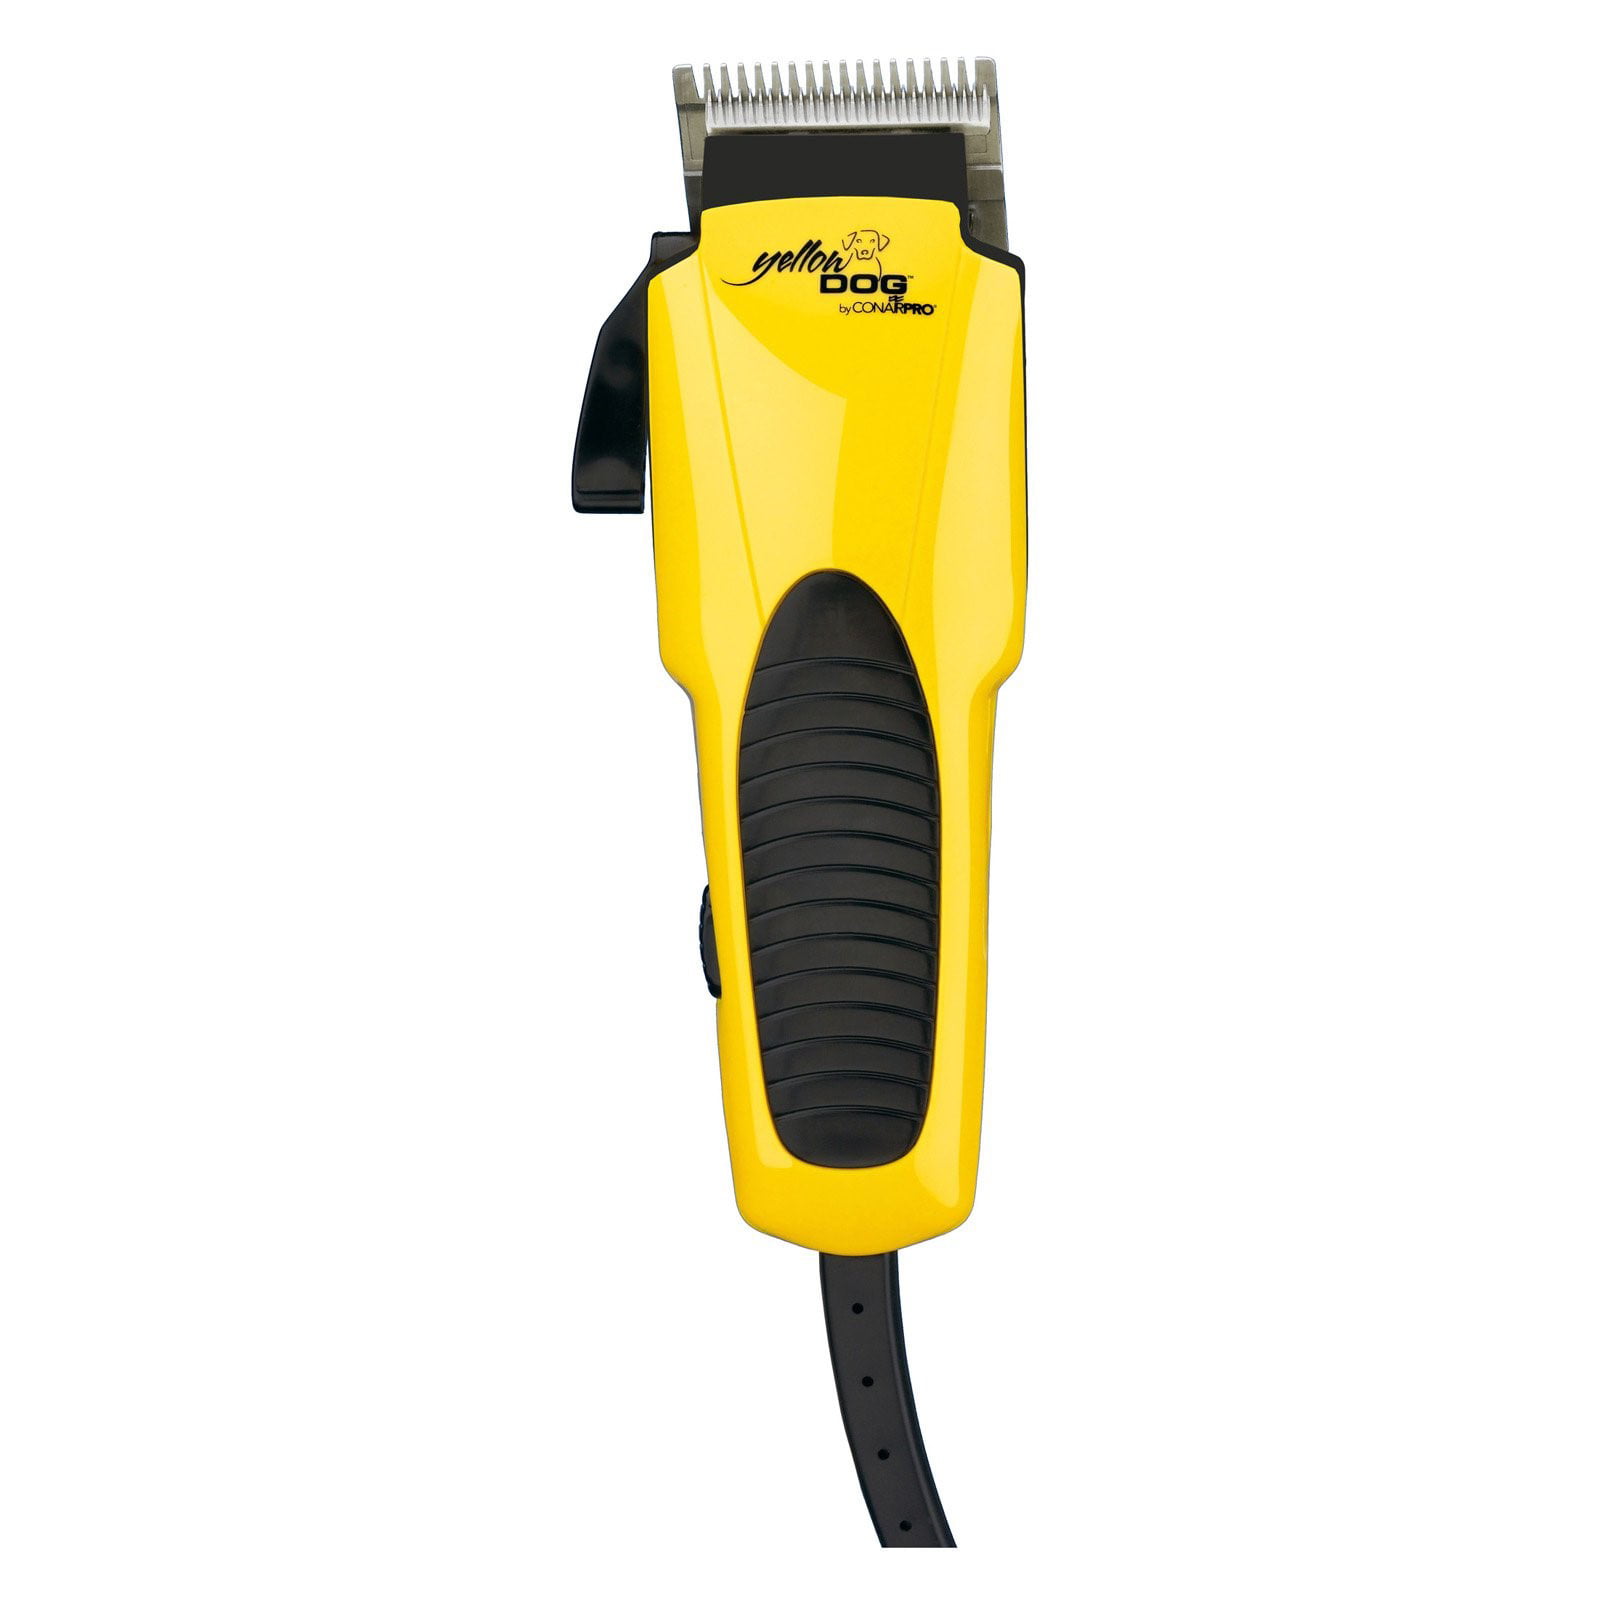 conair pro dog clippers review